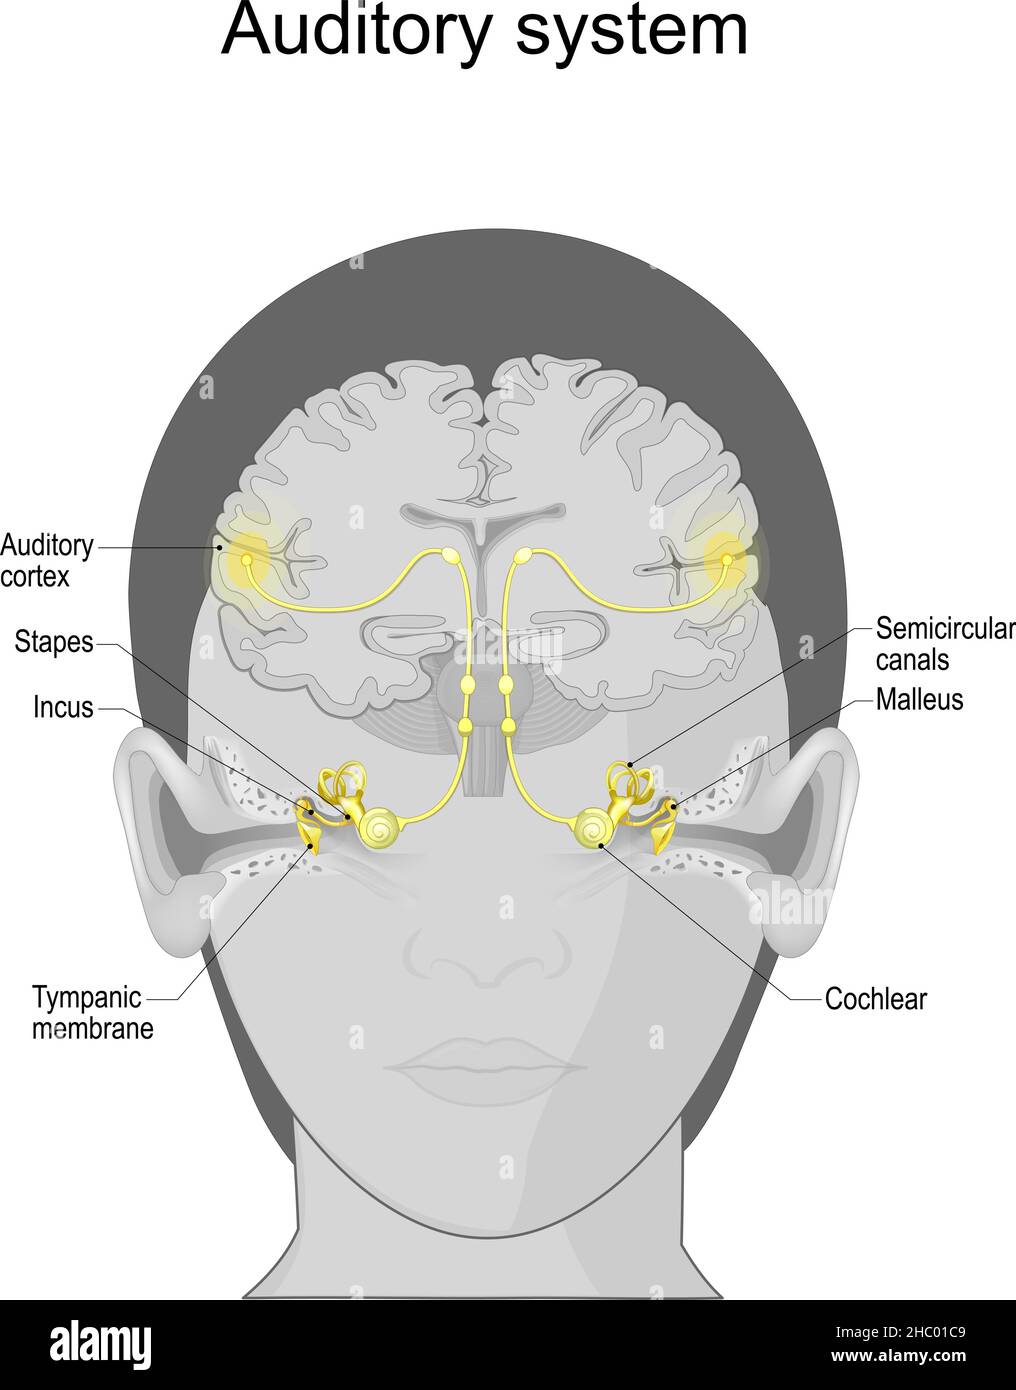 auditory system from Tympanic membrane and Cochlear in the ear to Auditory cortex on the brain. sensory system for the sense of hearing. Anatomy Stock Vector